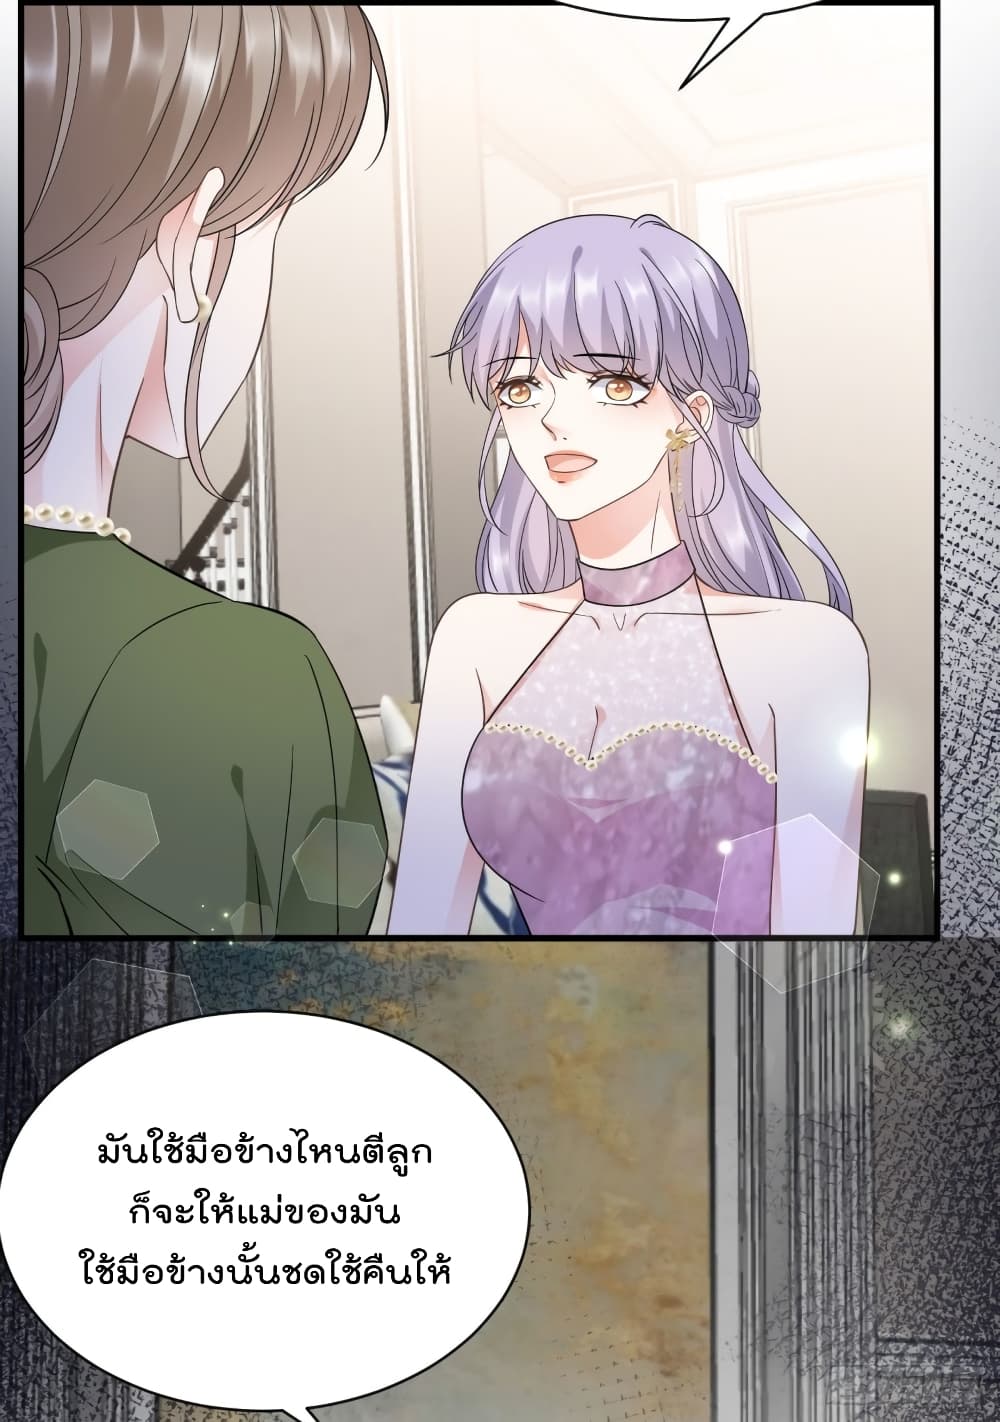 What Can the Eldest Lady Have คุณหนูใหญ่ ทำไมคุณร้ายอย่างนี้ 25-25